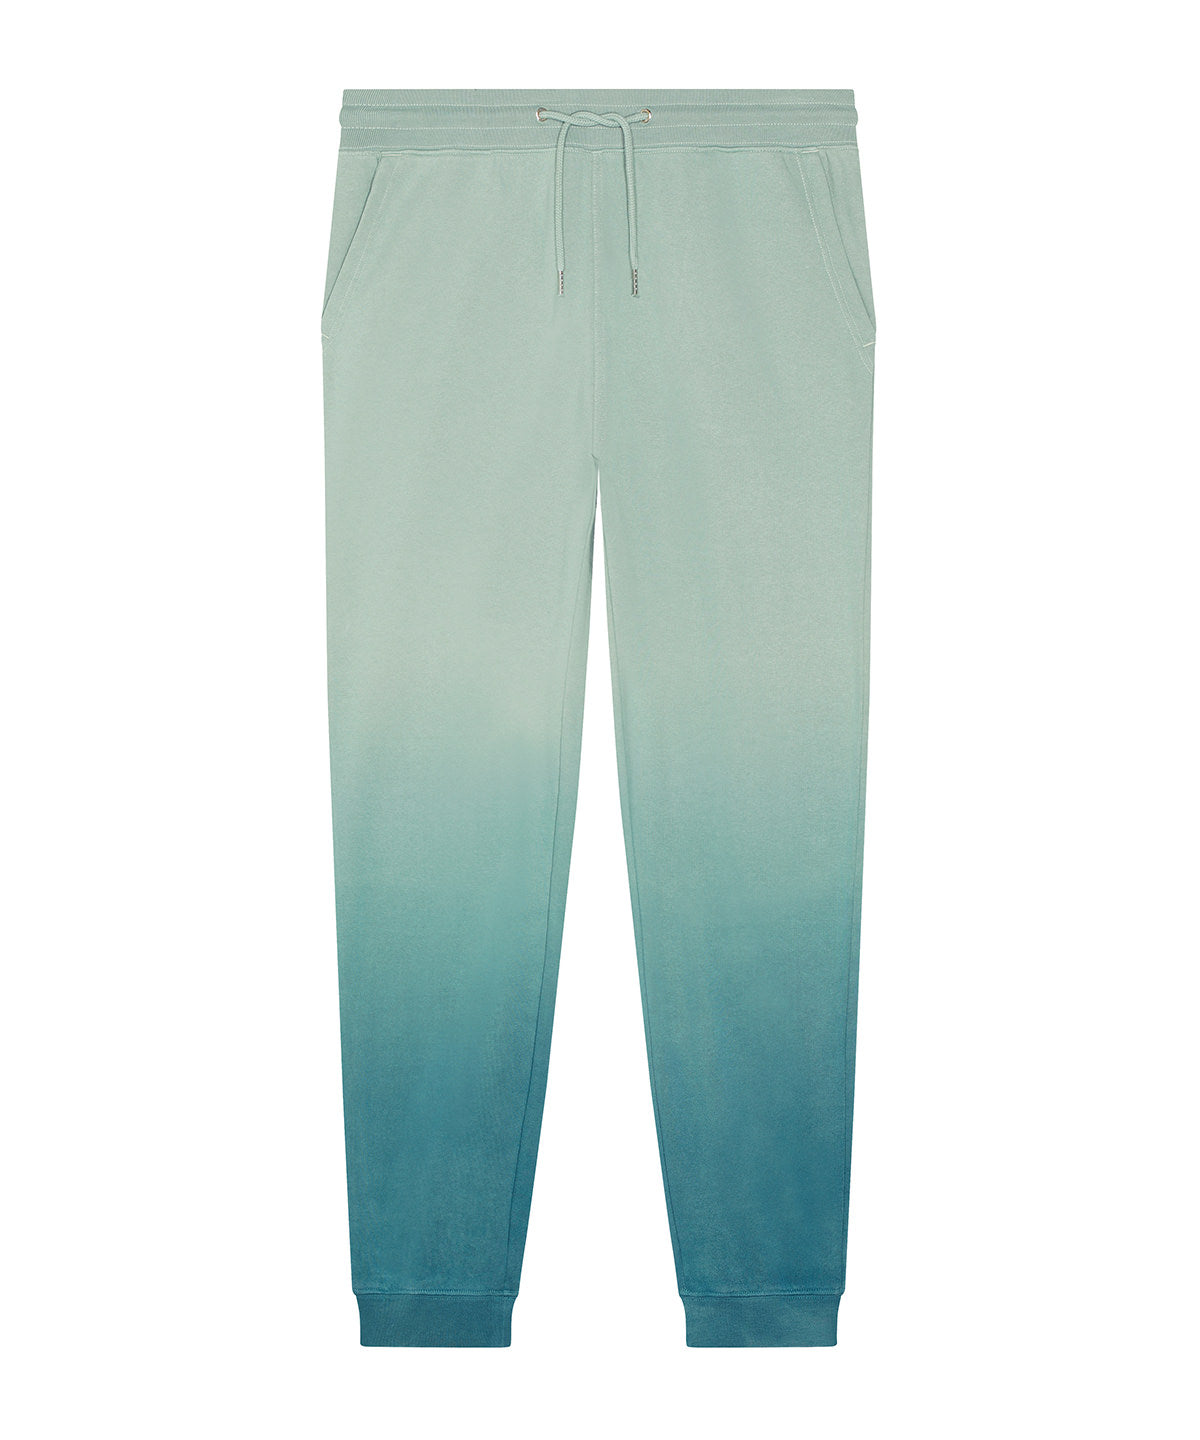 Stanley/Stella Mover Dip Dye, The Unisex Dip Dyed Jogger Pants